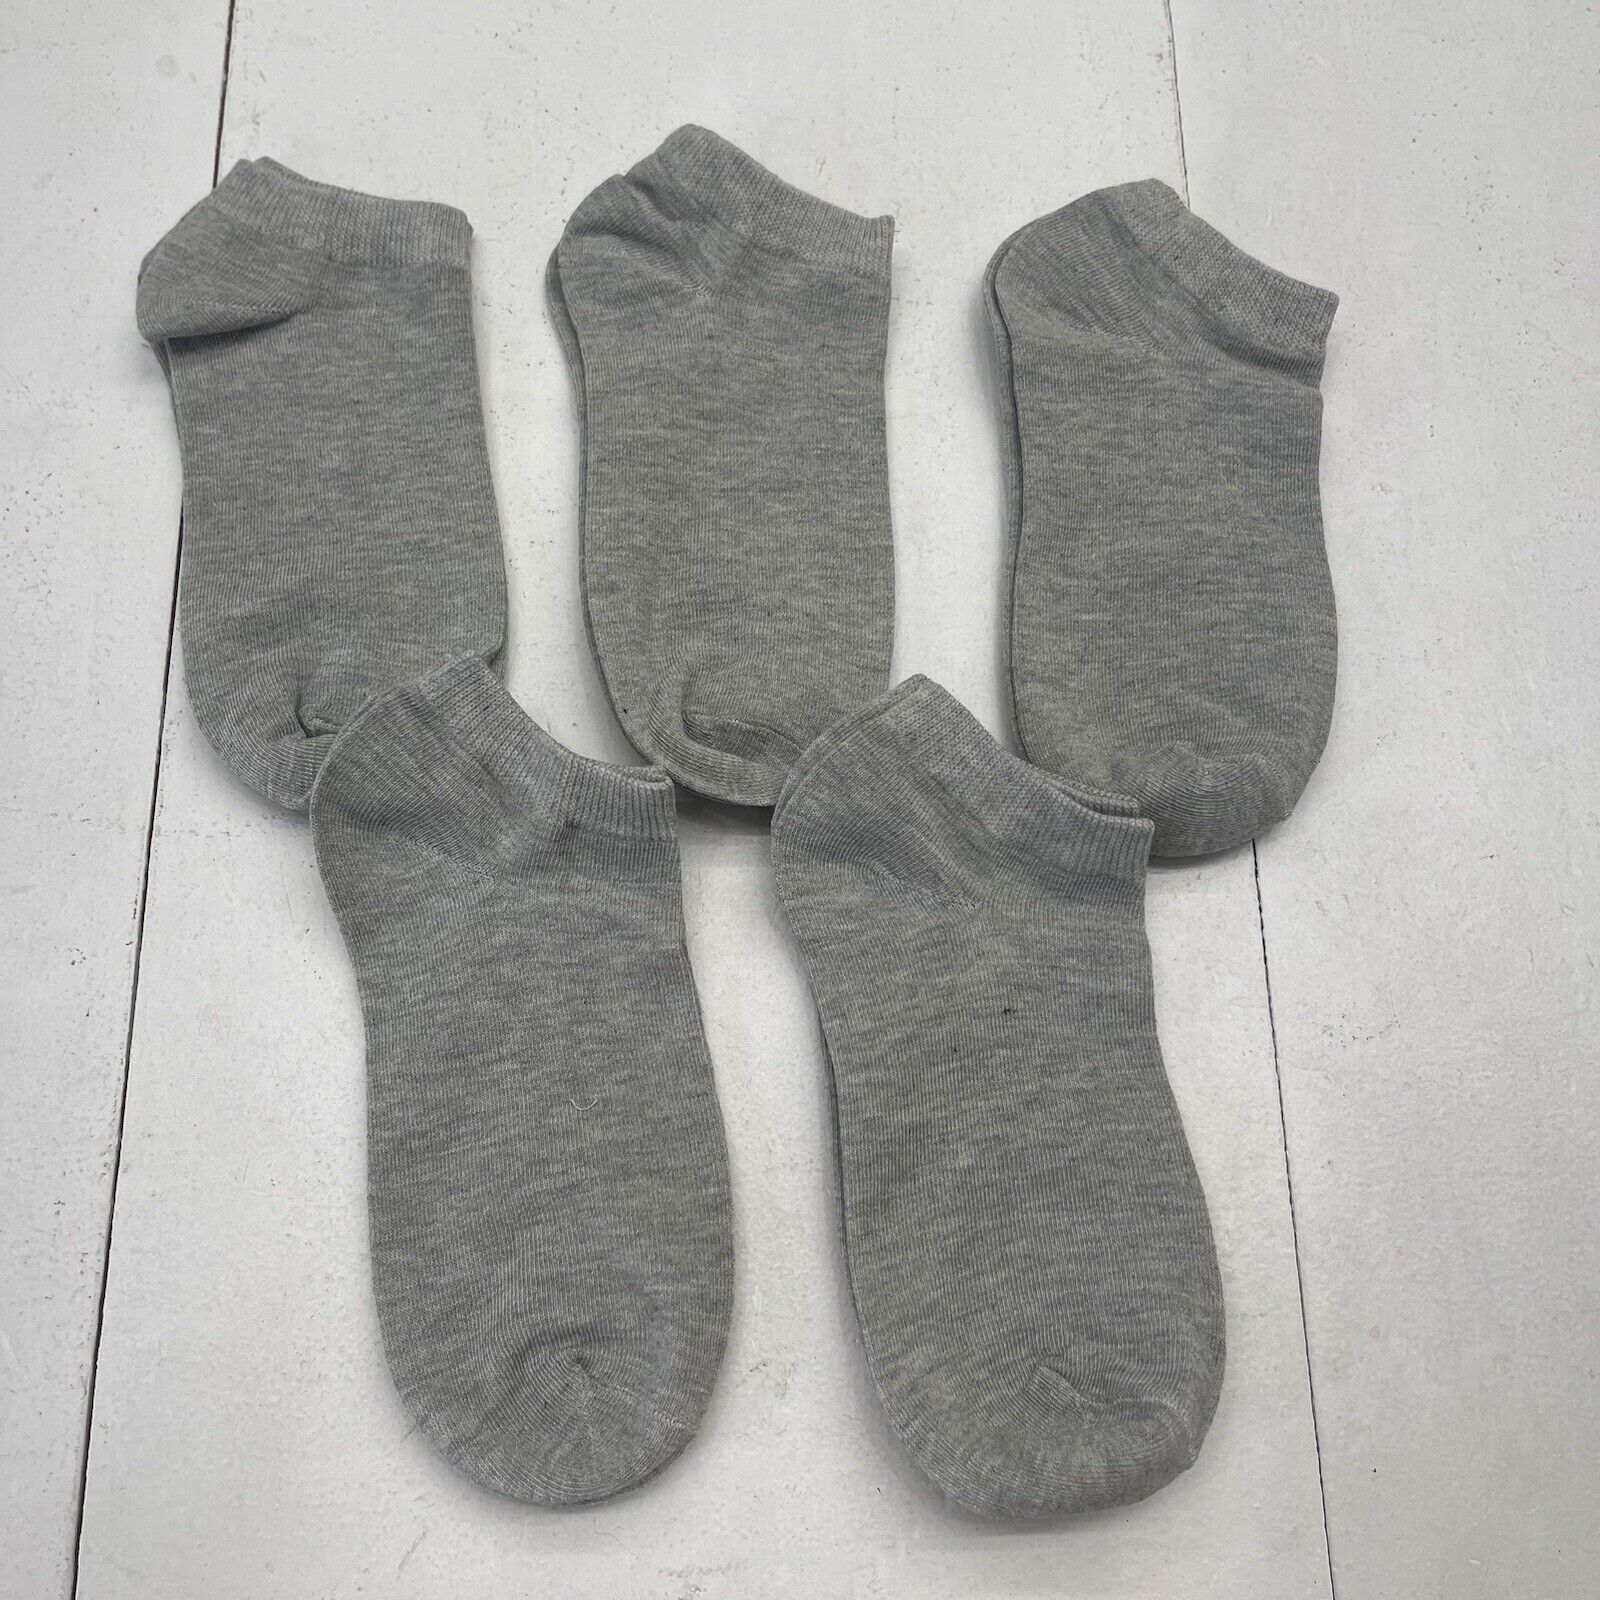 Unisex Adults Gray 5 Pack Ankle Socks Size OS